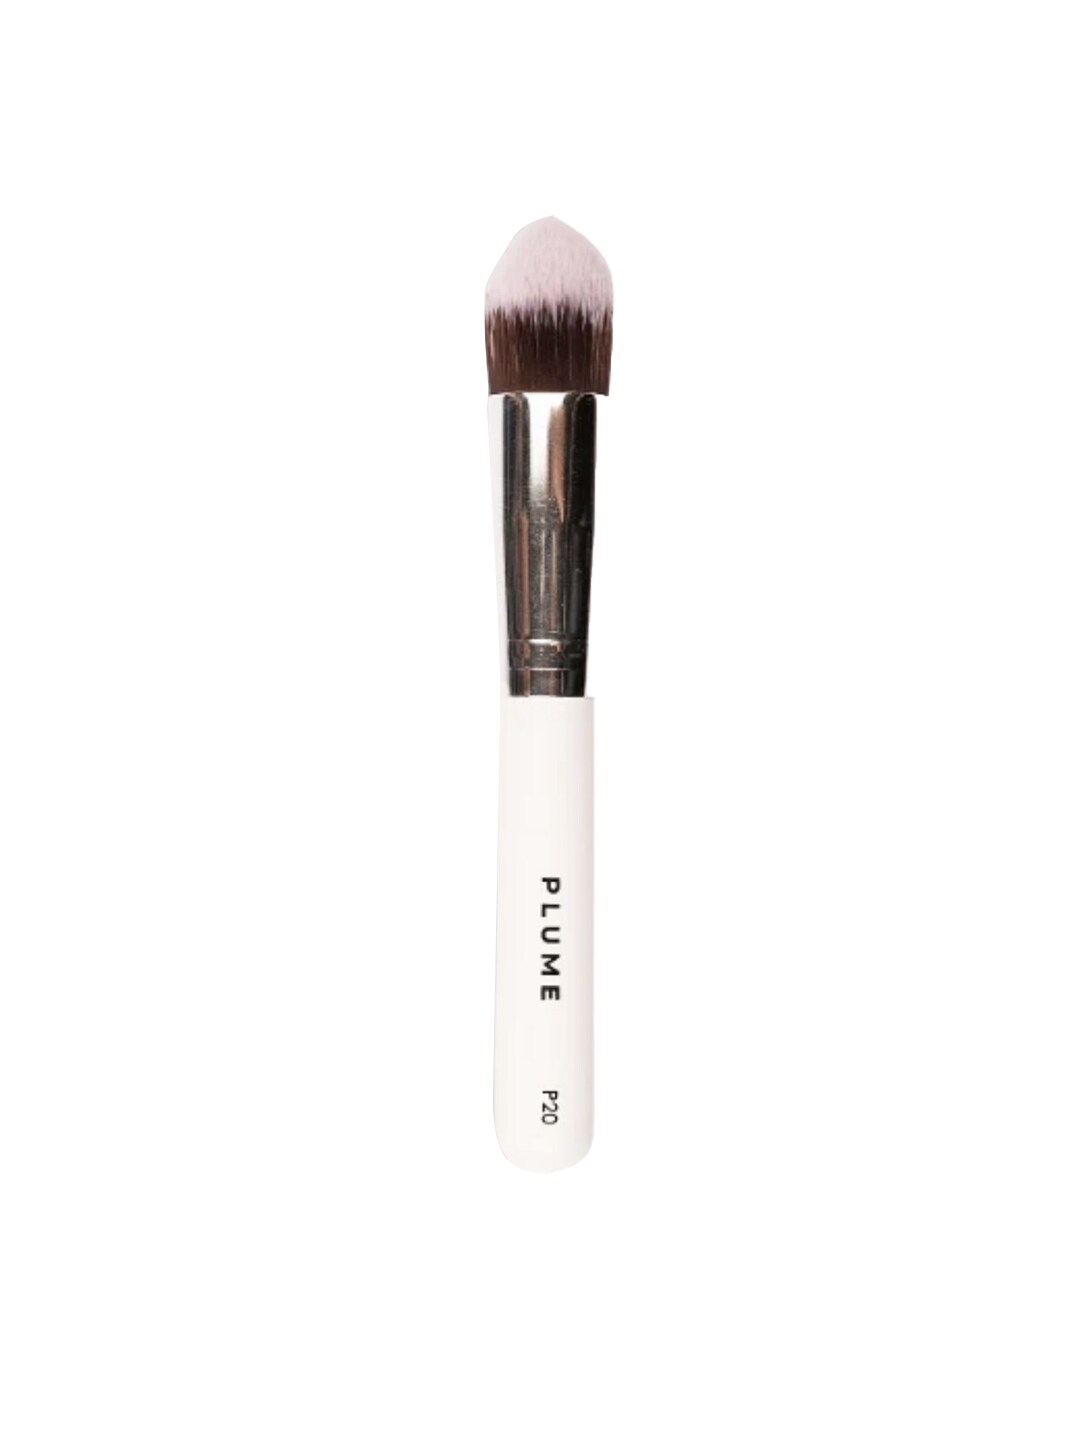 Plume Professional Dense Tapered Concealer/Foundation Brush - P20 White Price in India